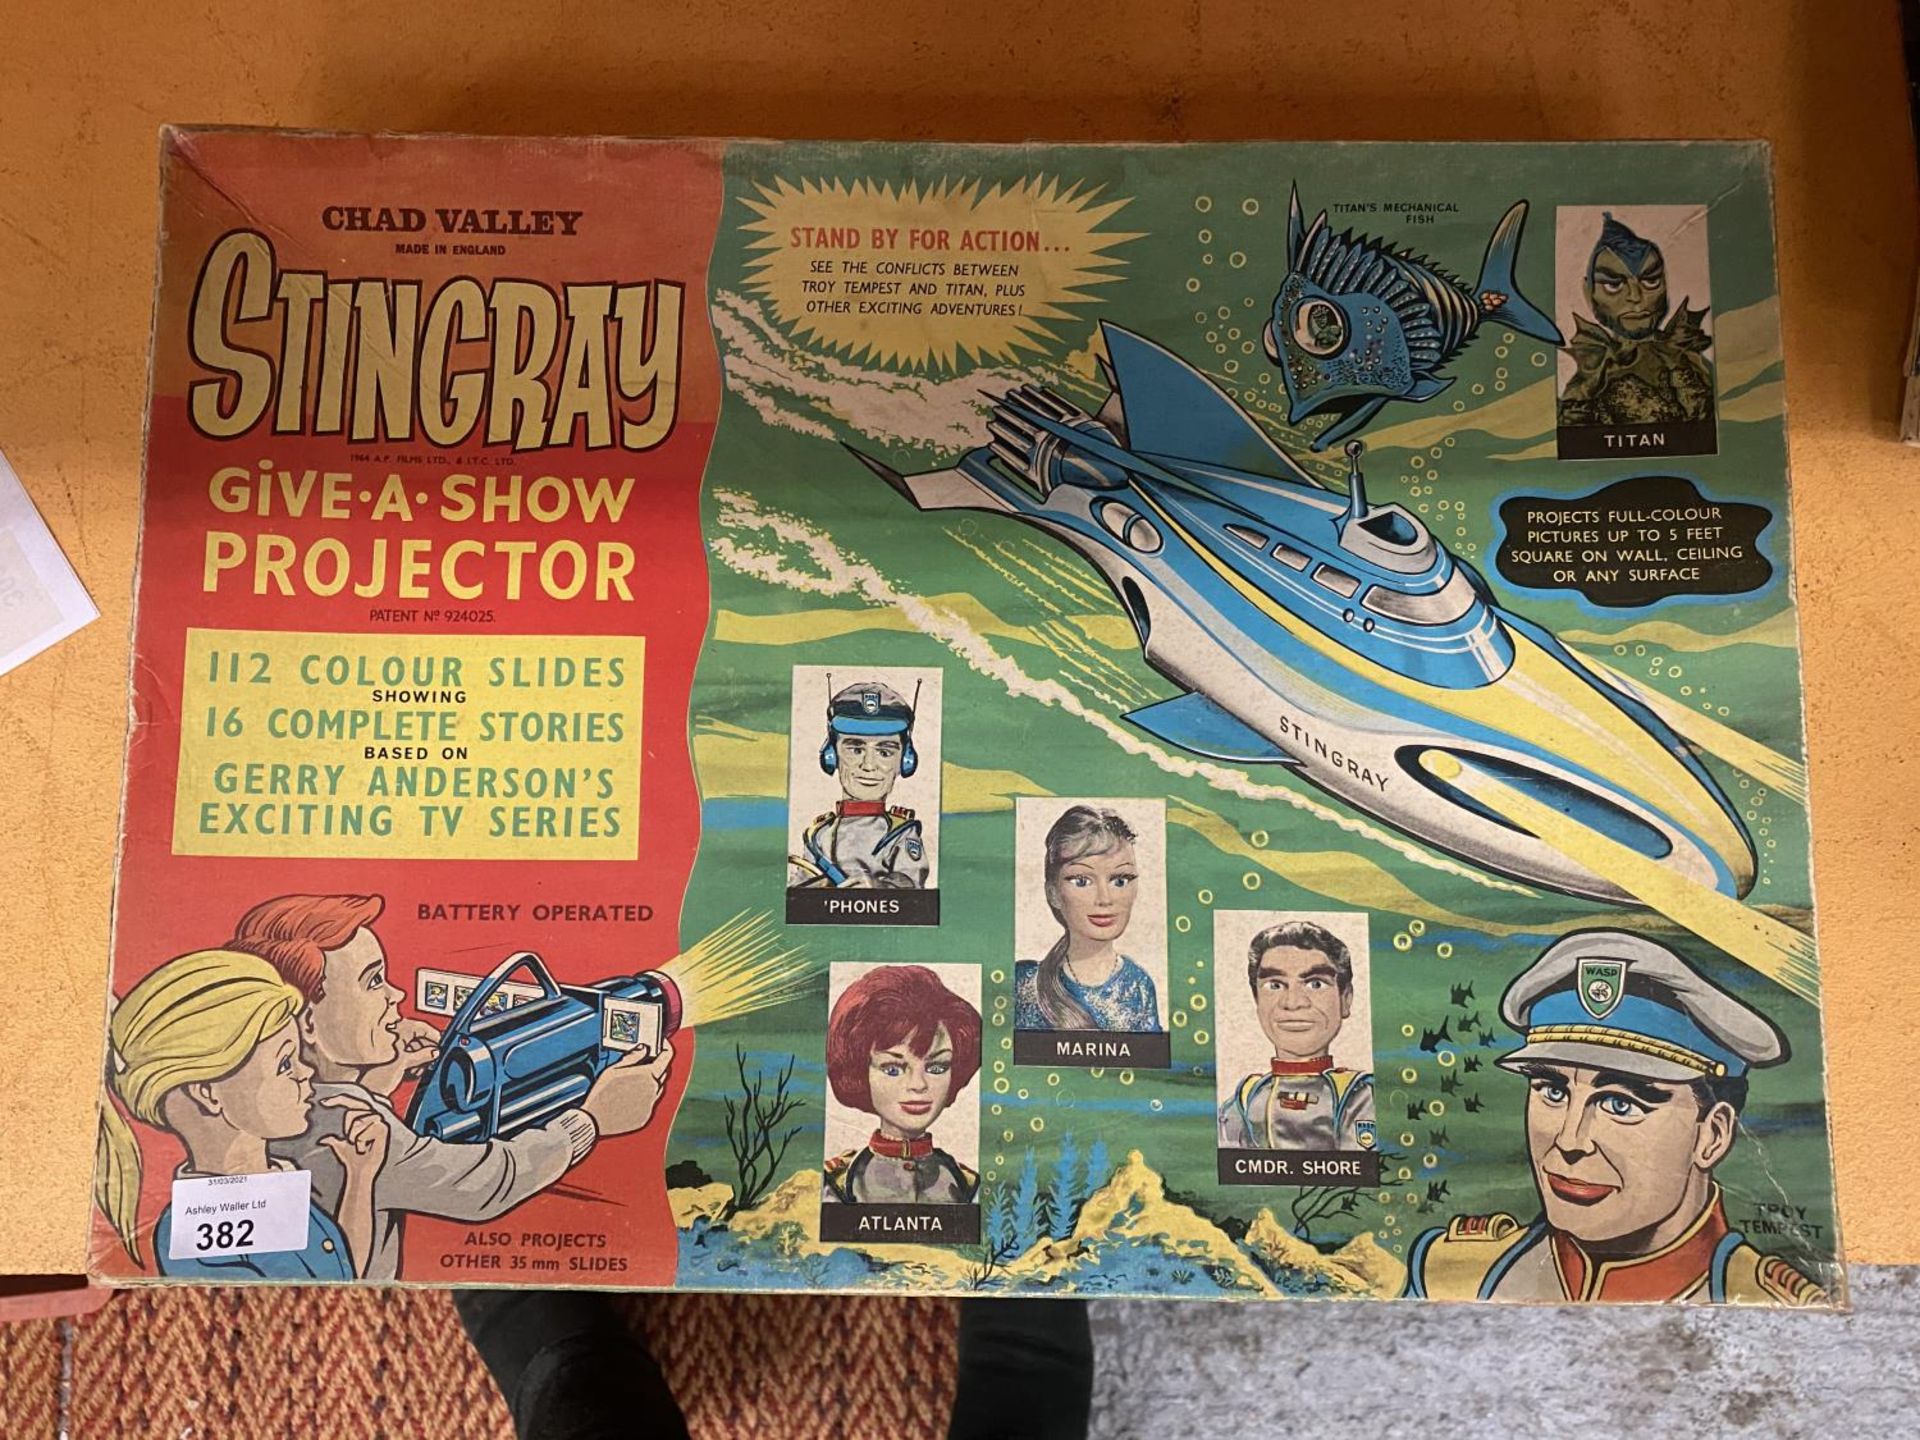 A BOXED VINTAGE CHAD VALLEY STINGRAY GIVE A SHOW PROJECTOR (COMPLETE) CIRCA 1965